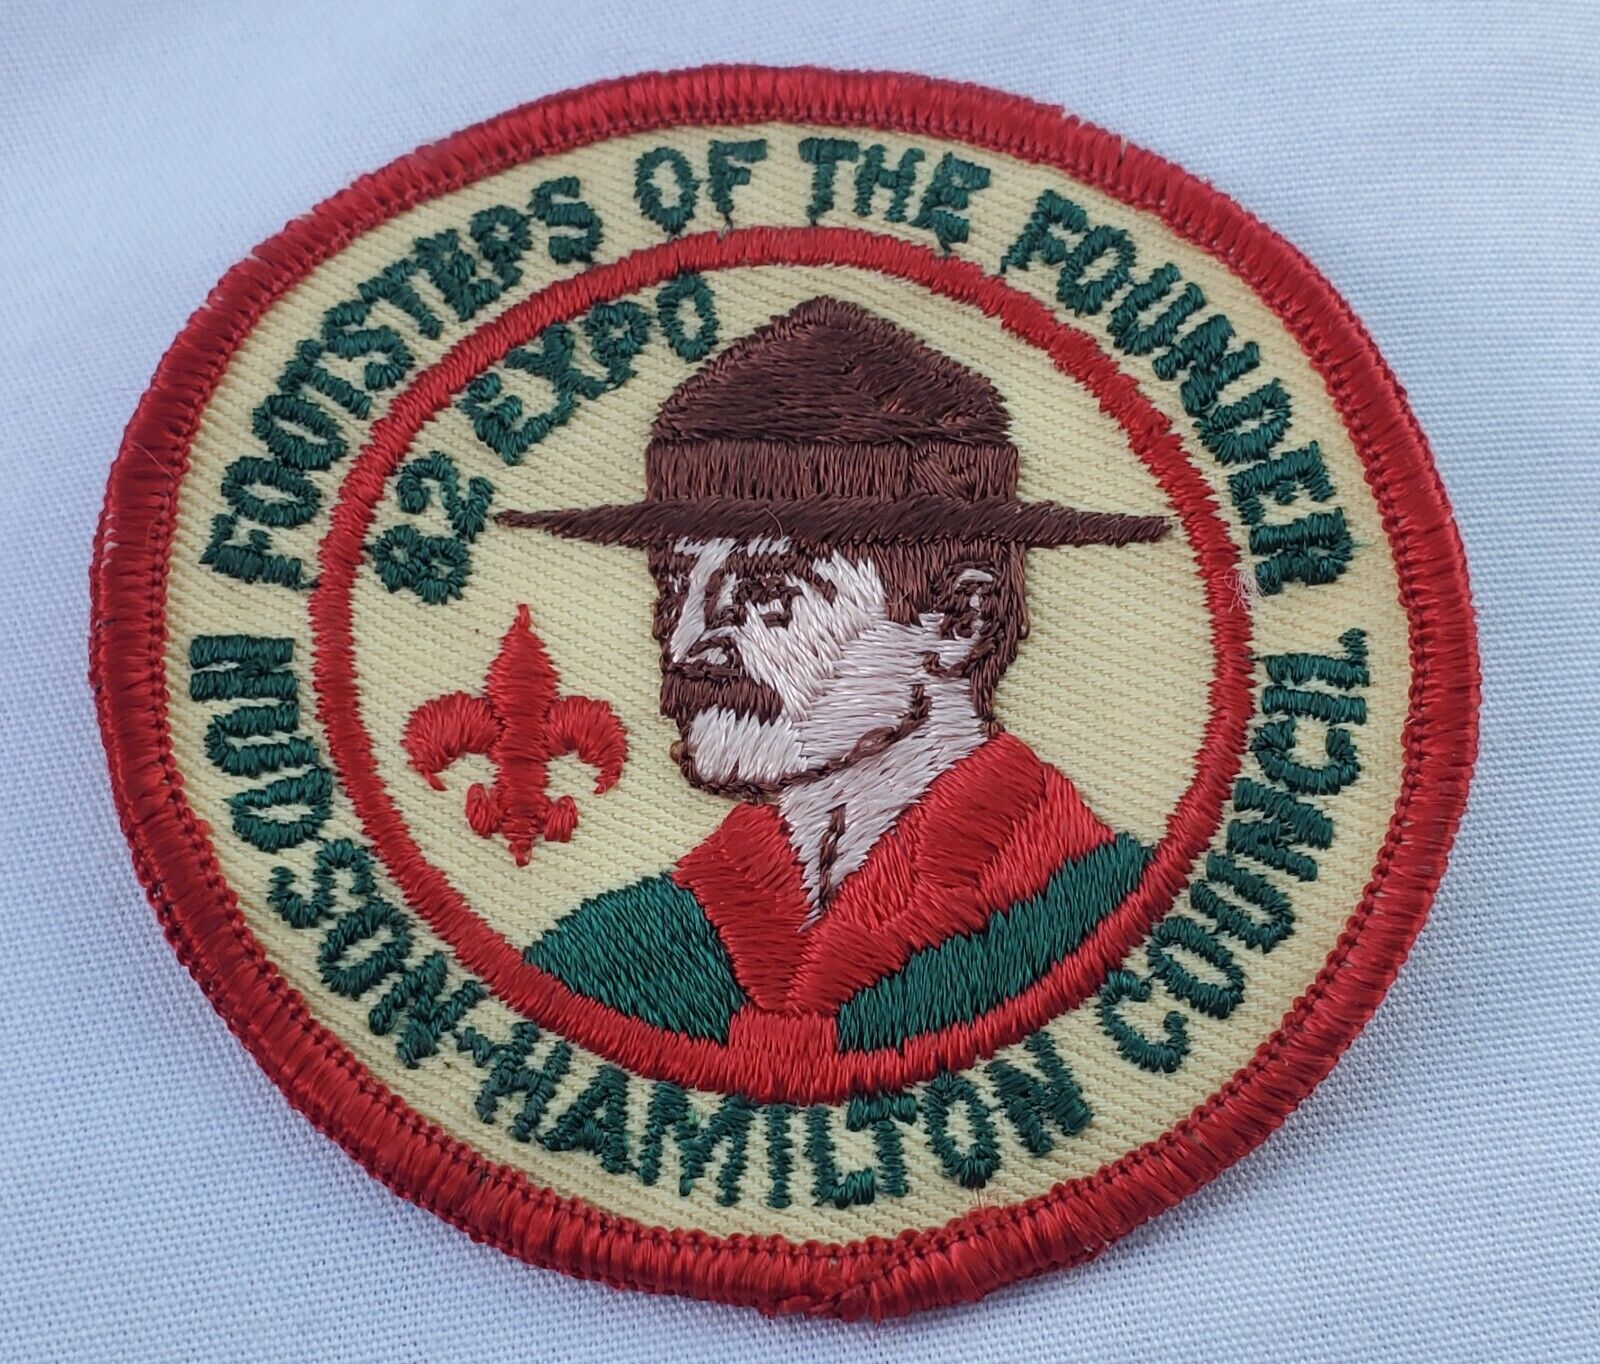 1982 Expo Footsteps of the Founder Hudson-Hamilton Council Boy Scouts Patch BSA